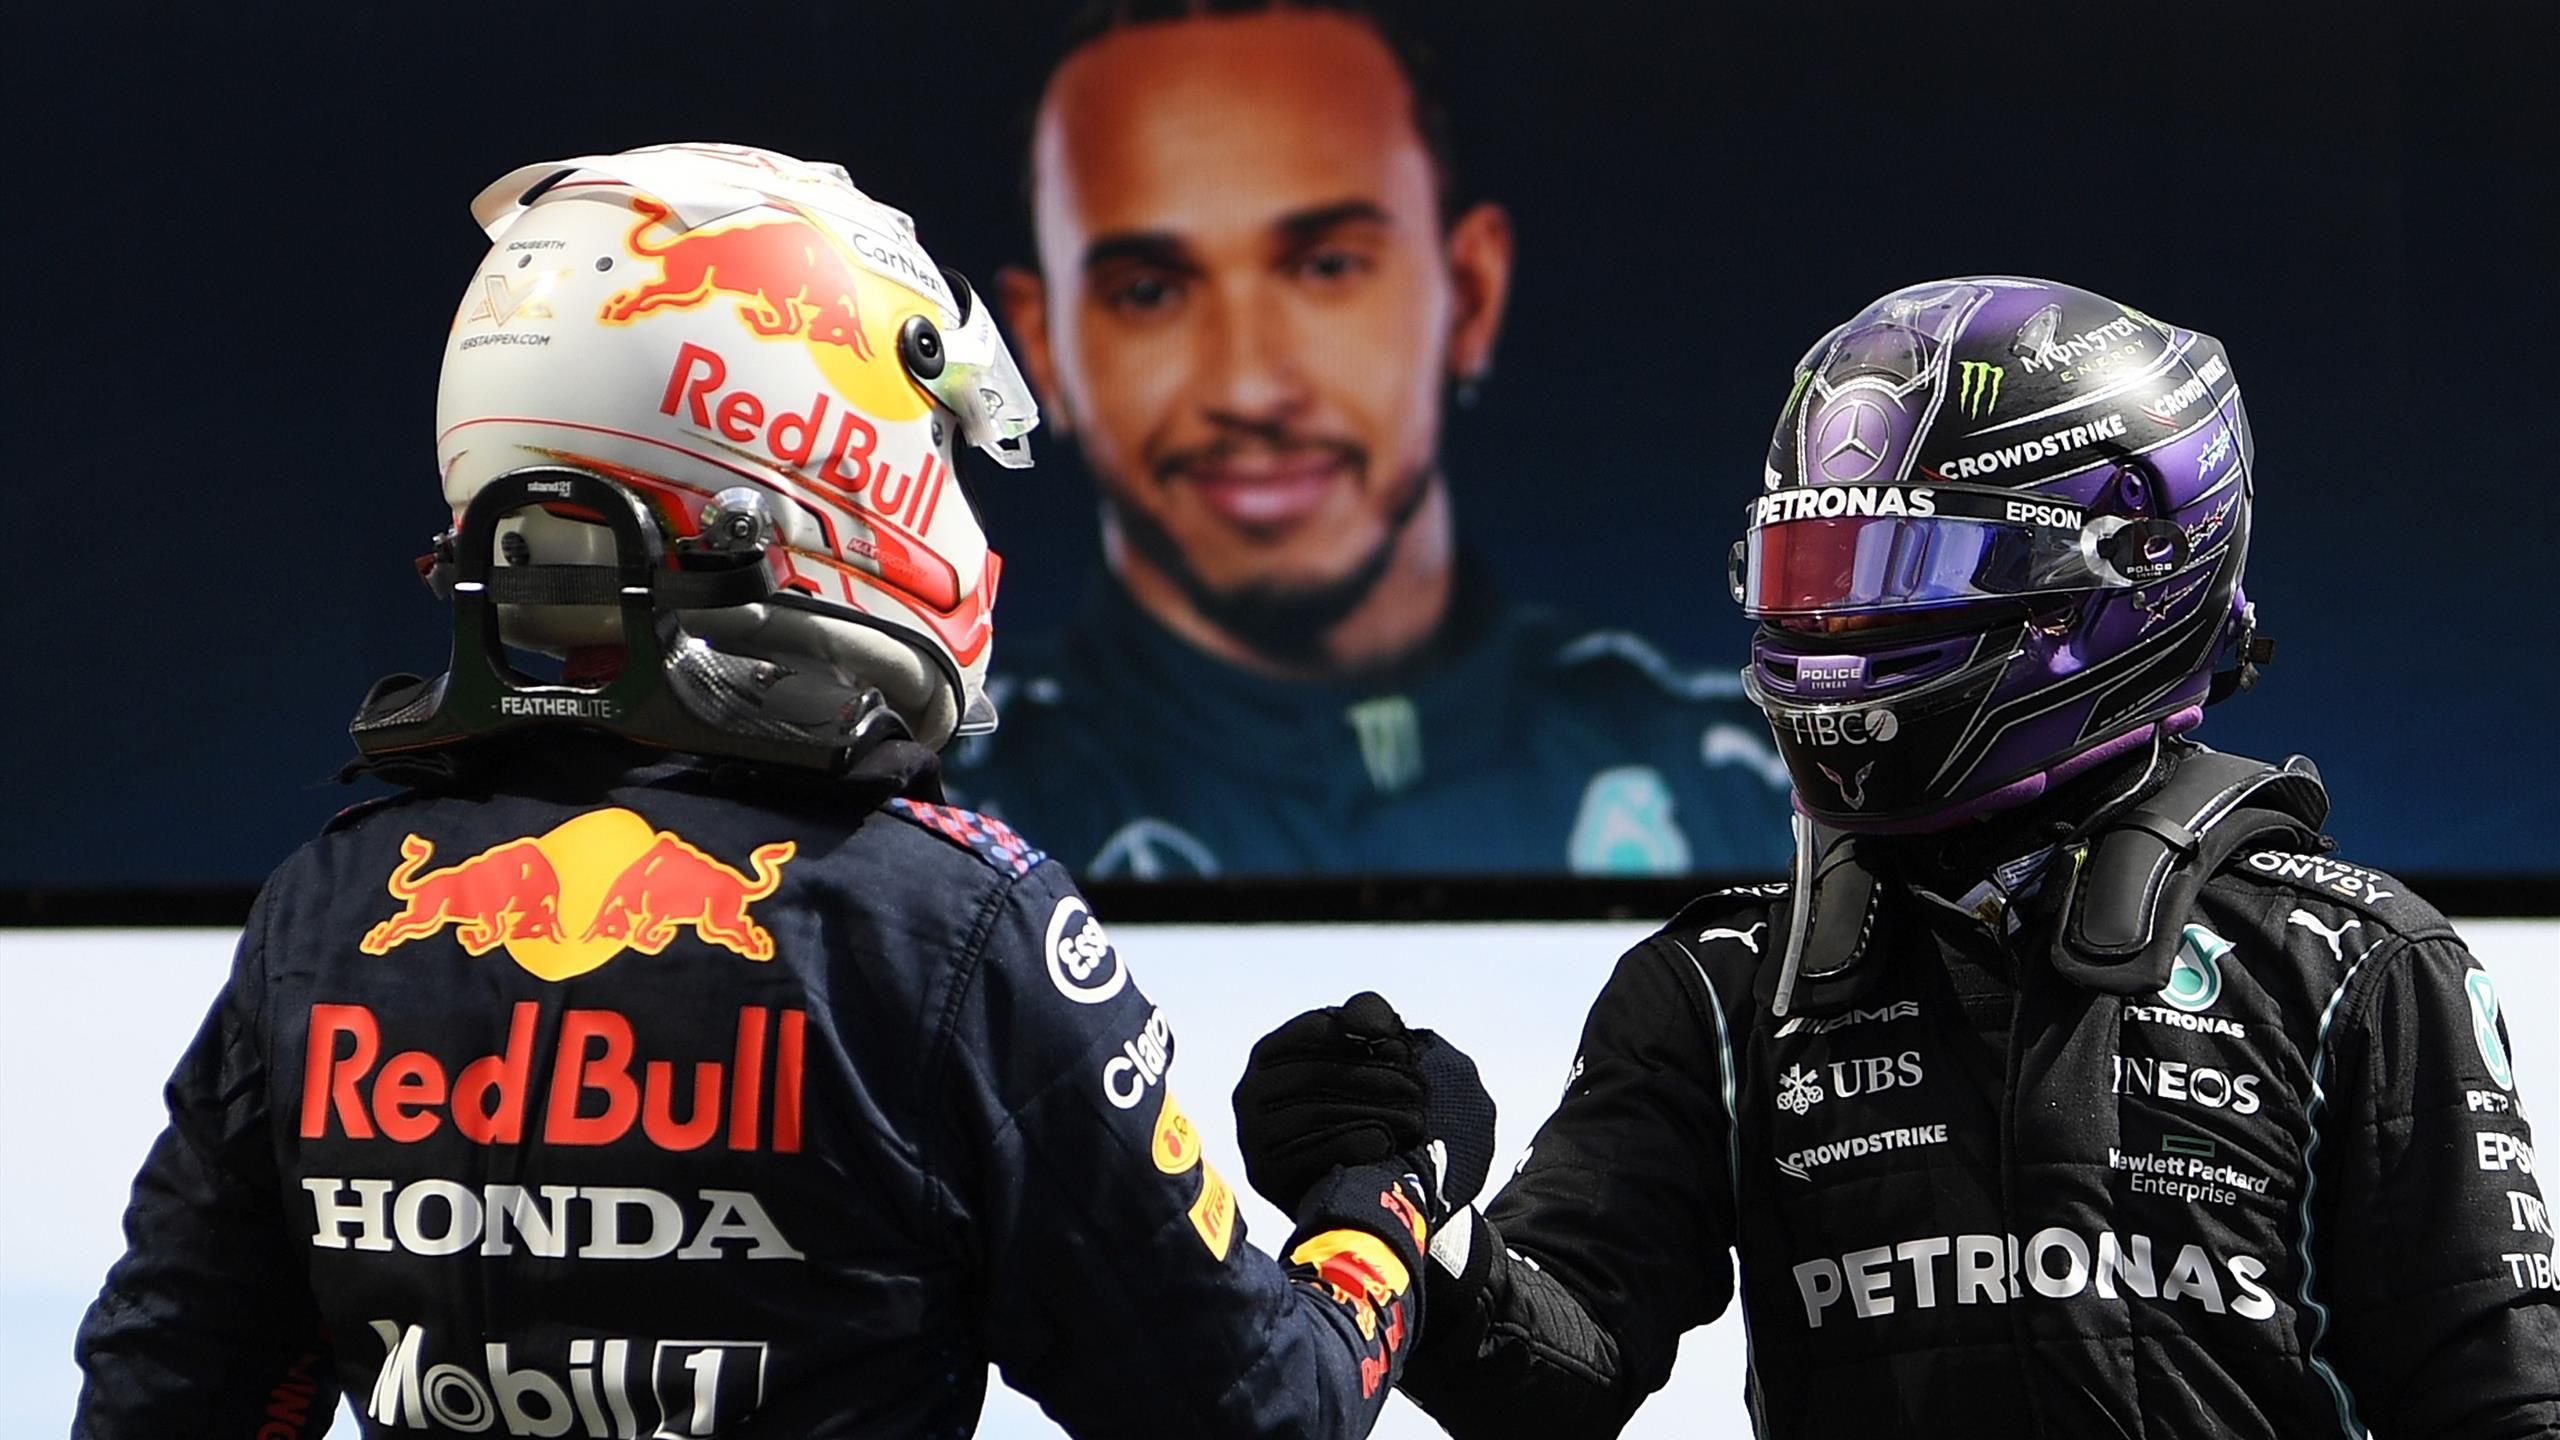 Lewis Hamilton v Max Verstappen Like all good TV shows, duel to end F1 season has a must-watch finale